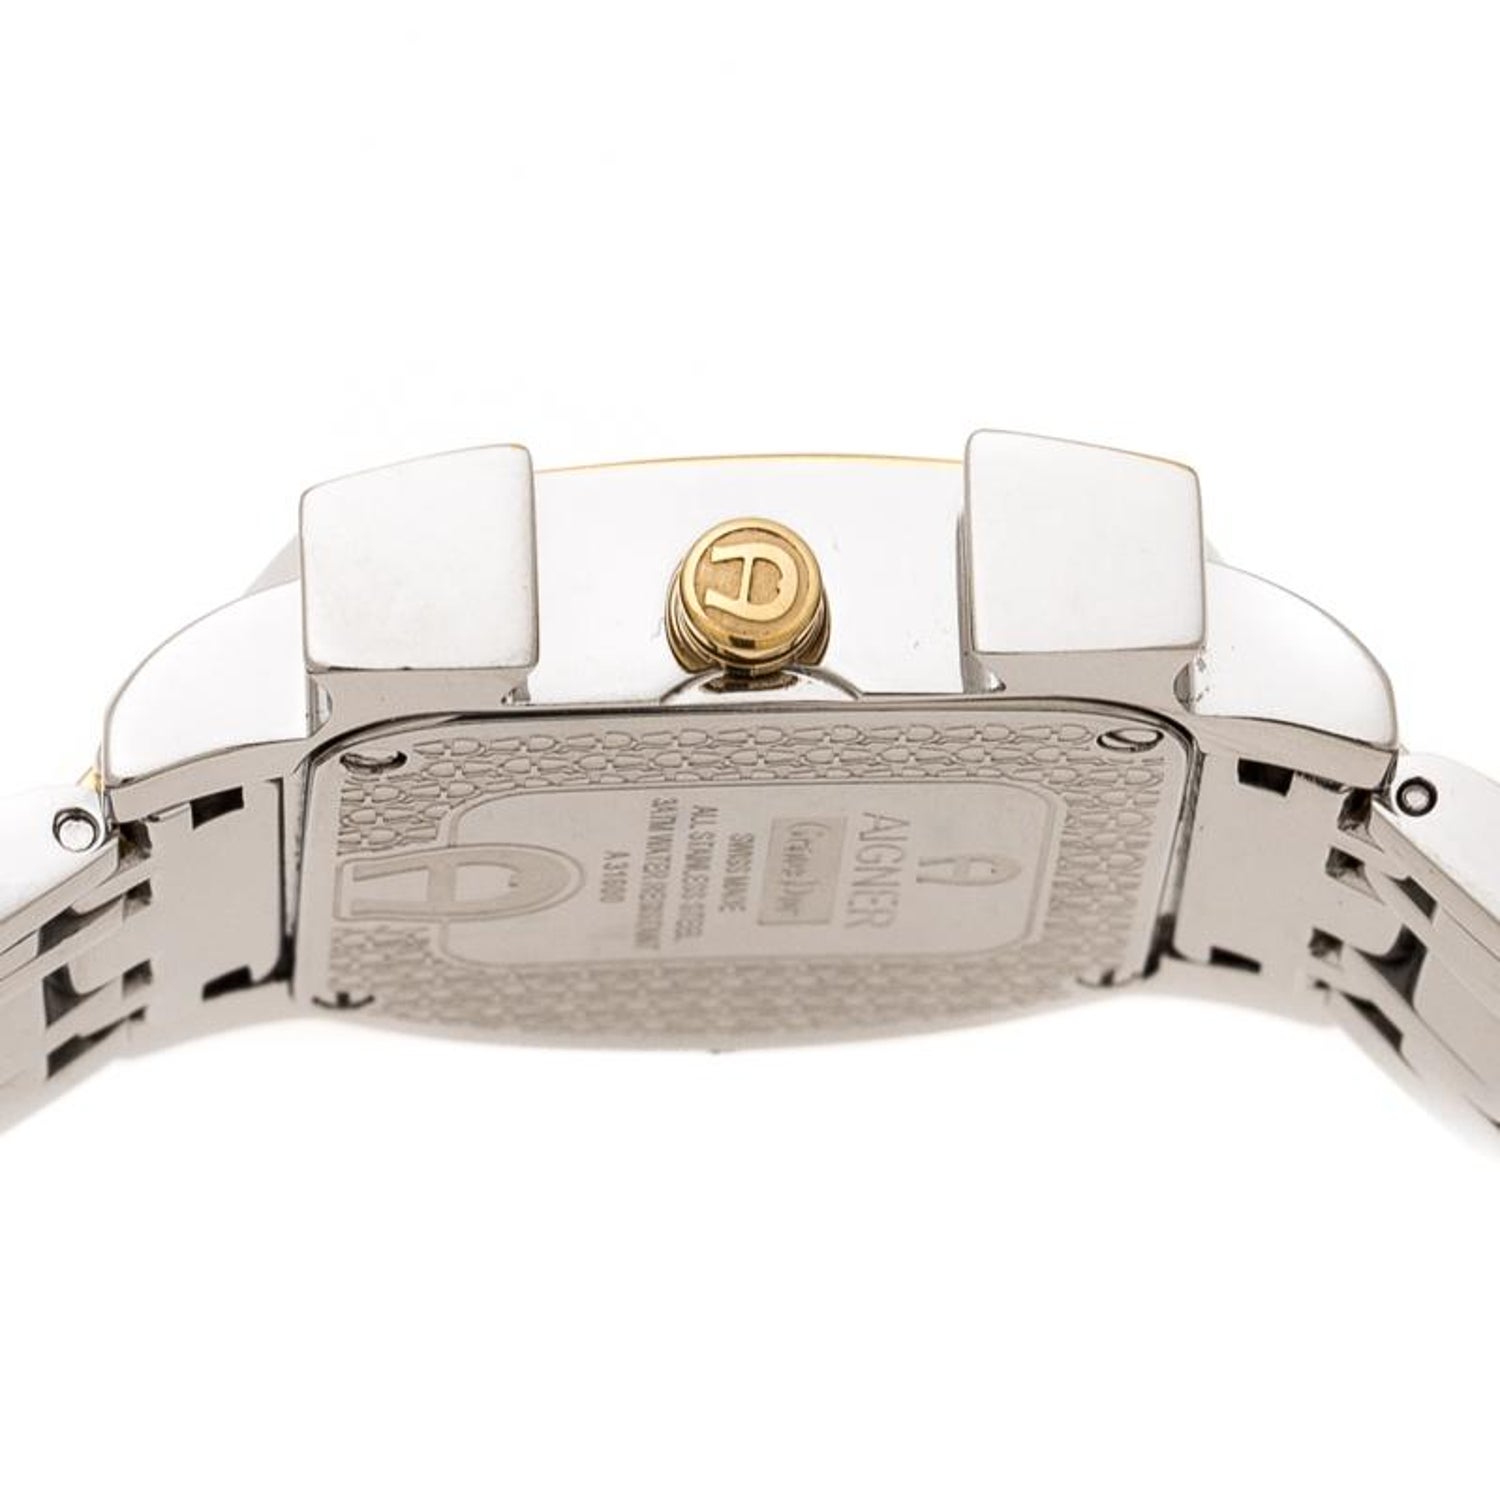 Aigner White Leaves Two-Tone Genua Due A31600 Women's Wristwatch 31 mm For  Sale at 1stDibs | aigner genua due a31600, aigner genua due, aigner a31600